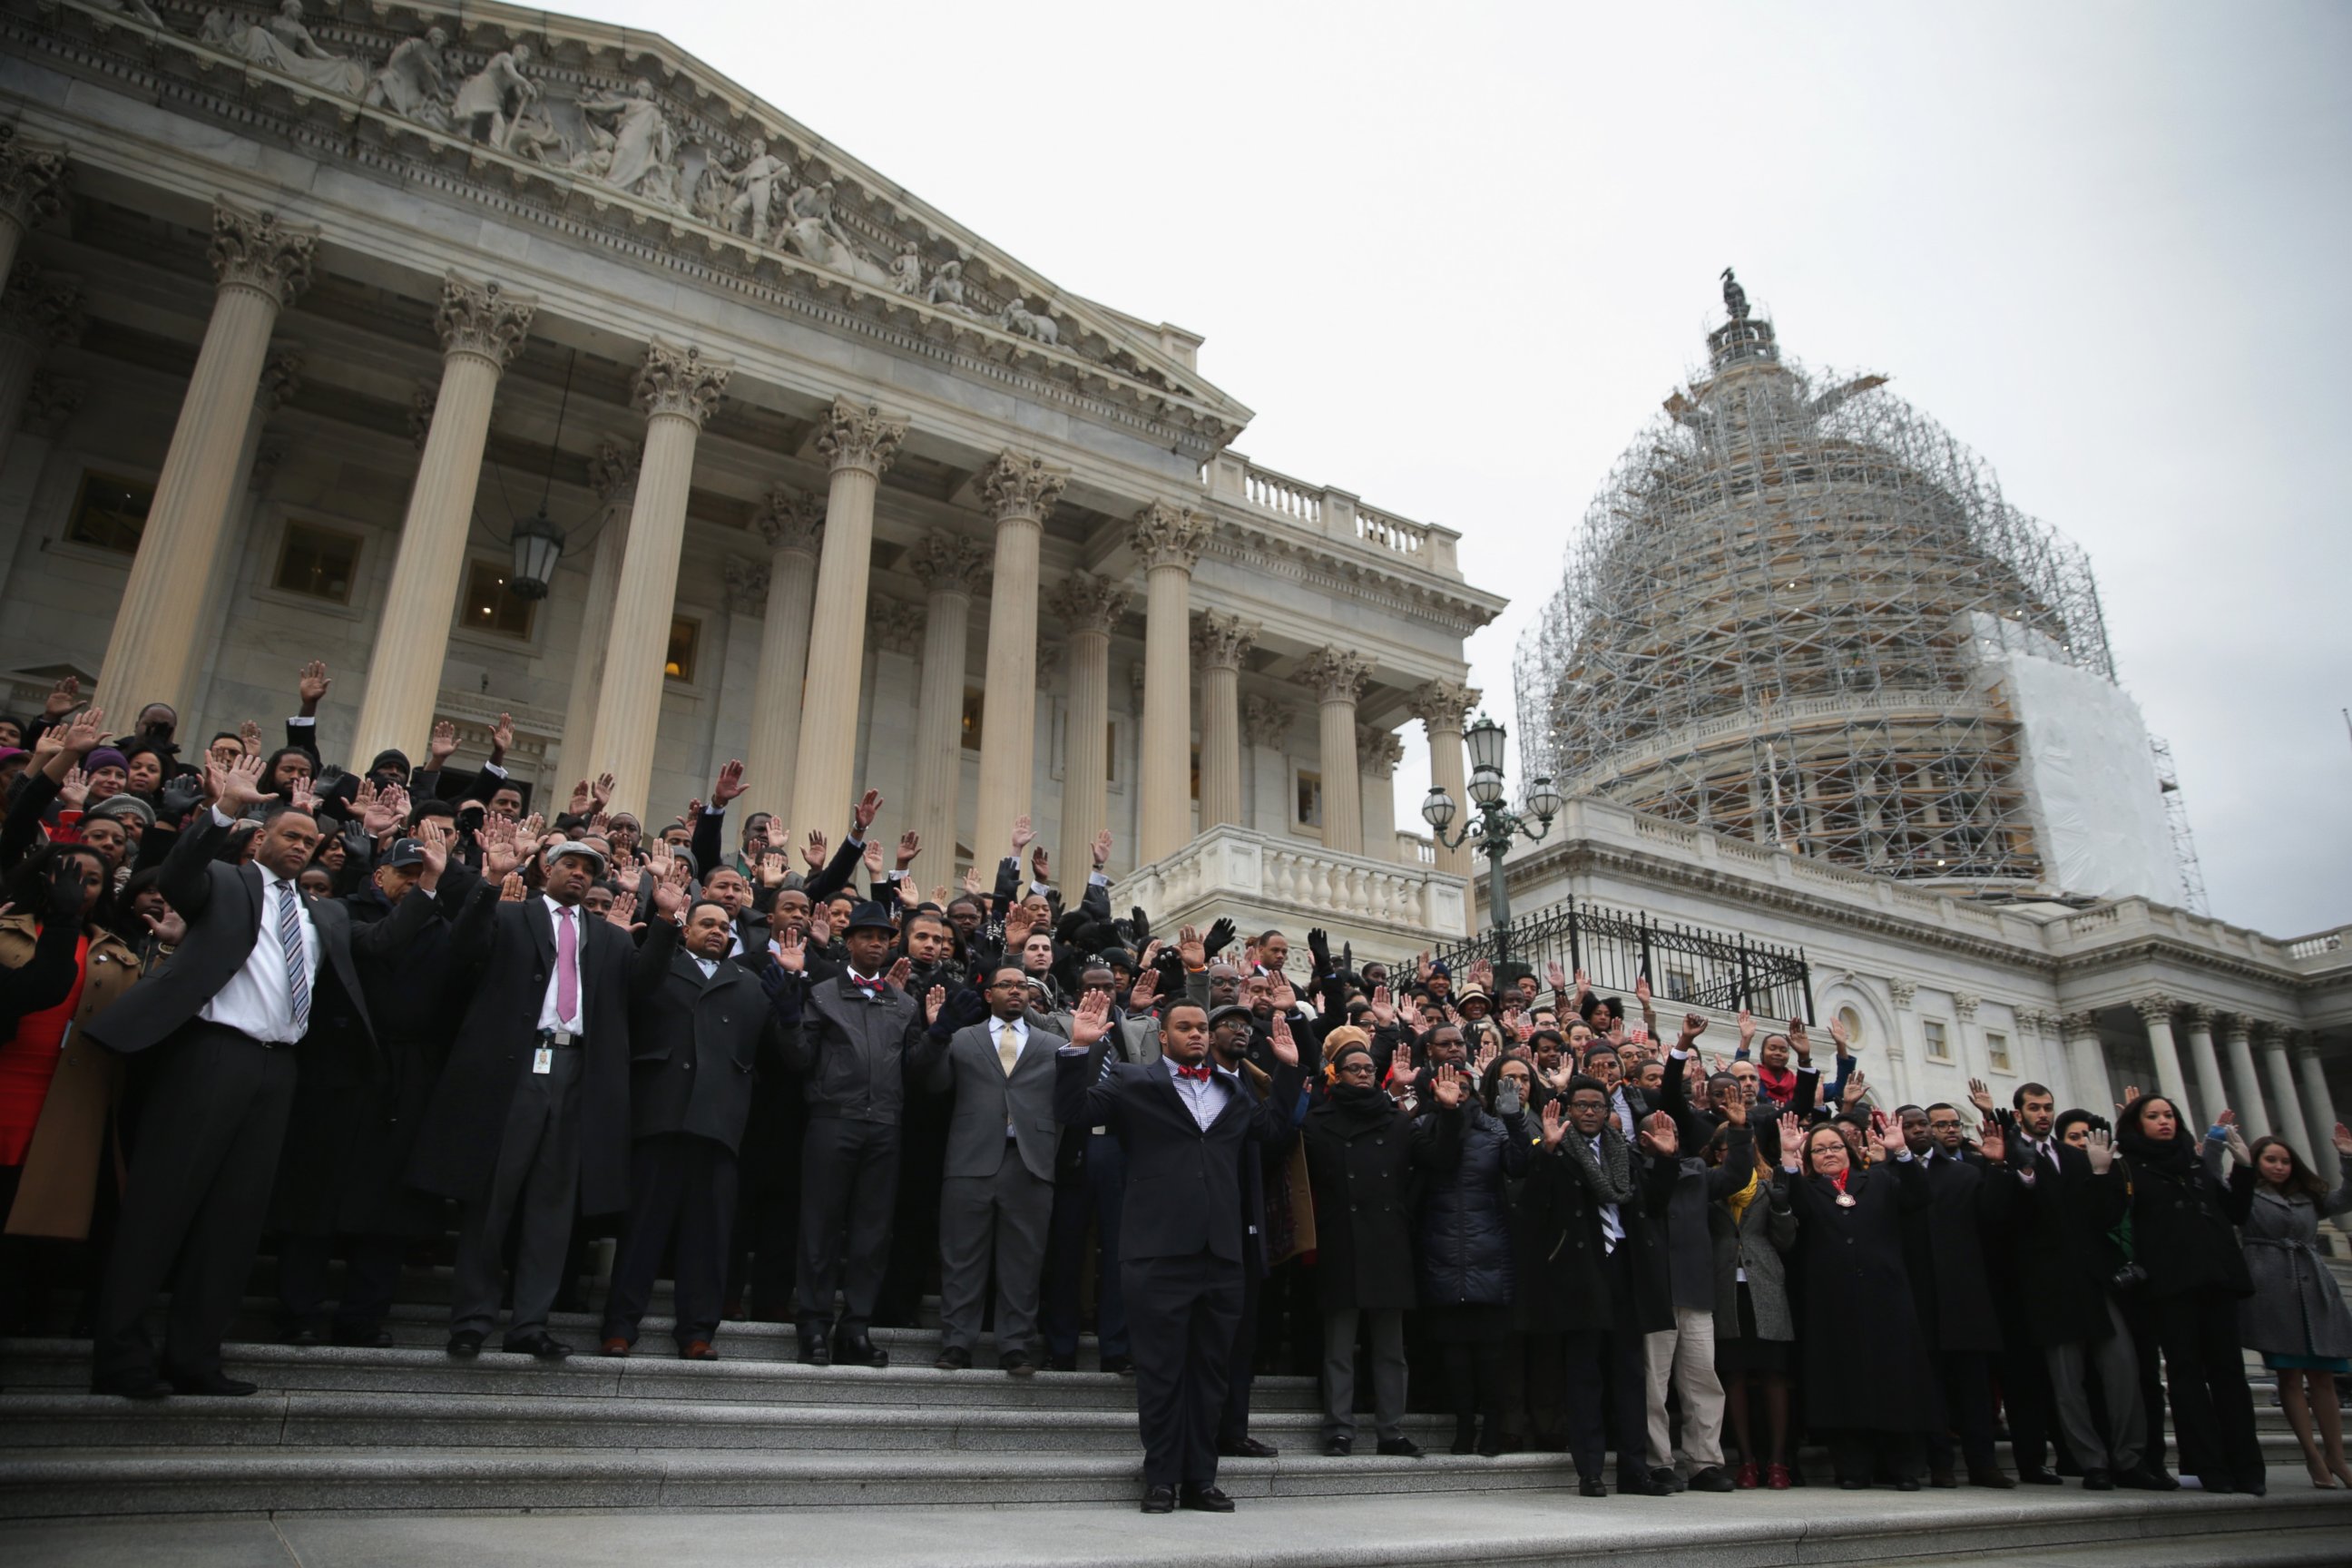 PHOTO: Black congressional staffers hold their hands up during a walkout to protest the recent Mike Brown and Eric Garner grand jury decisions on Dec. 11, 2014 on the steps of the U.S. Capitol in Washington, DC. 